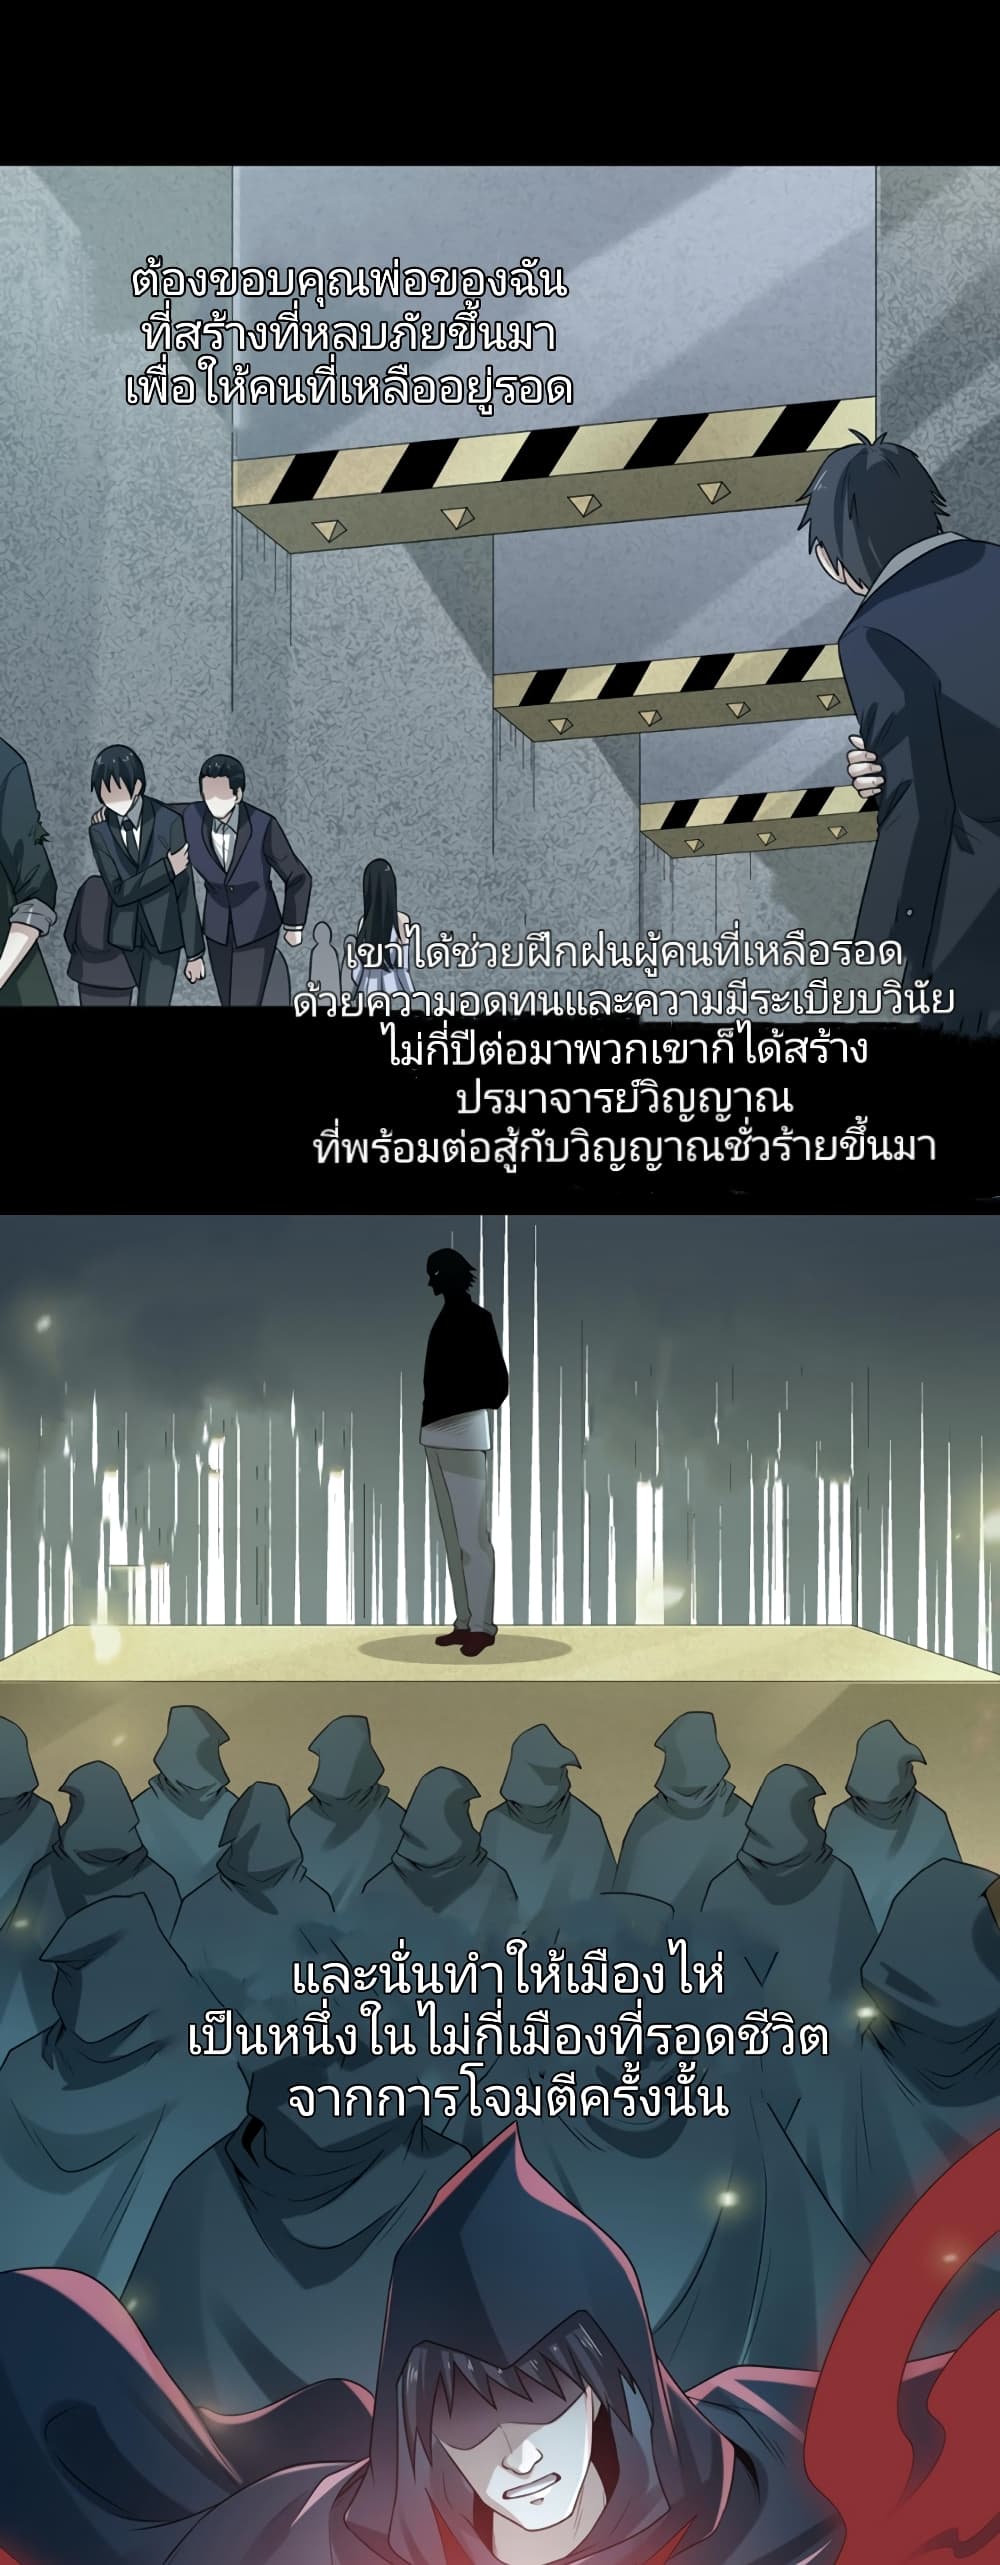 The Age of Ghost Spirits à¸à¸­à¸à¸à¸µà¹ 40 (5)